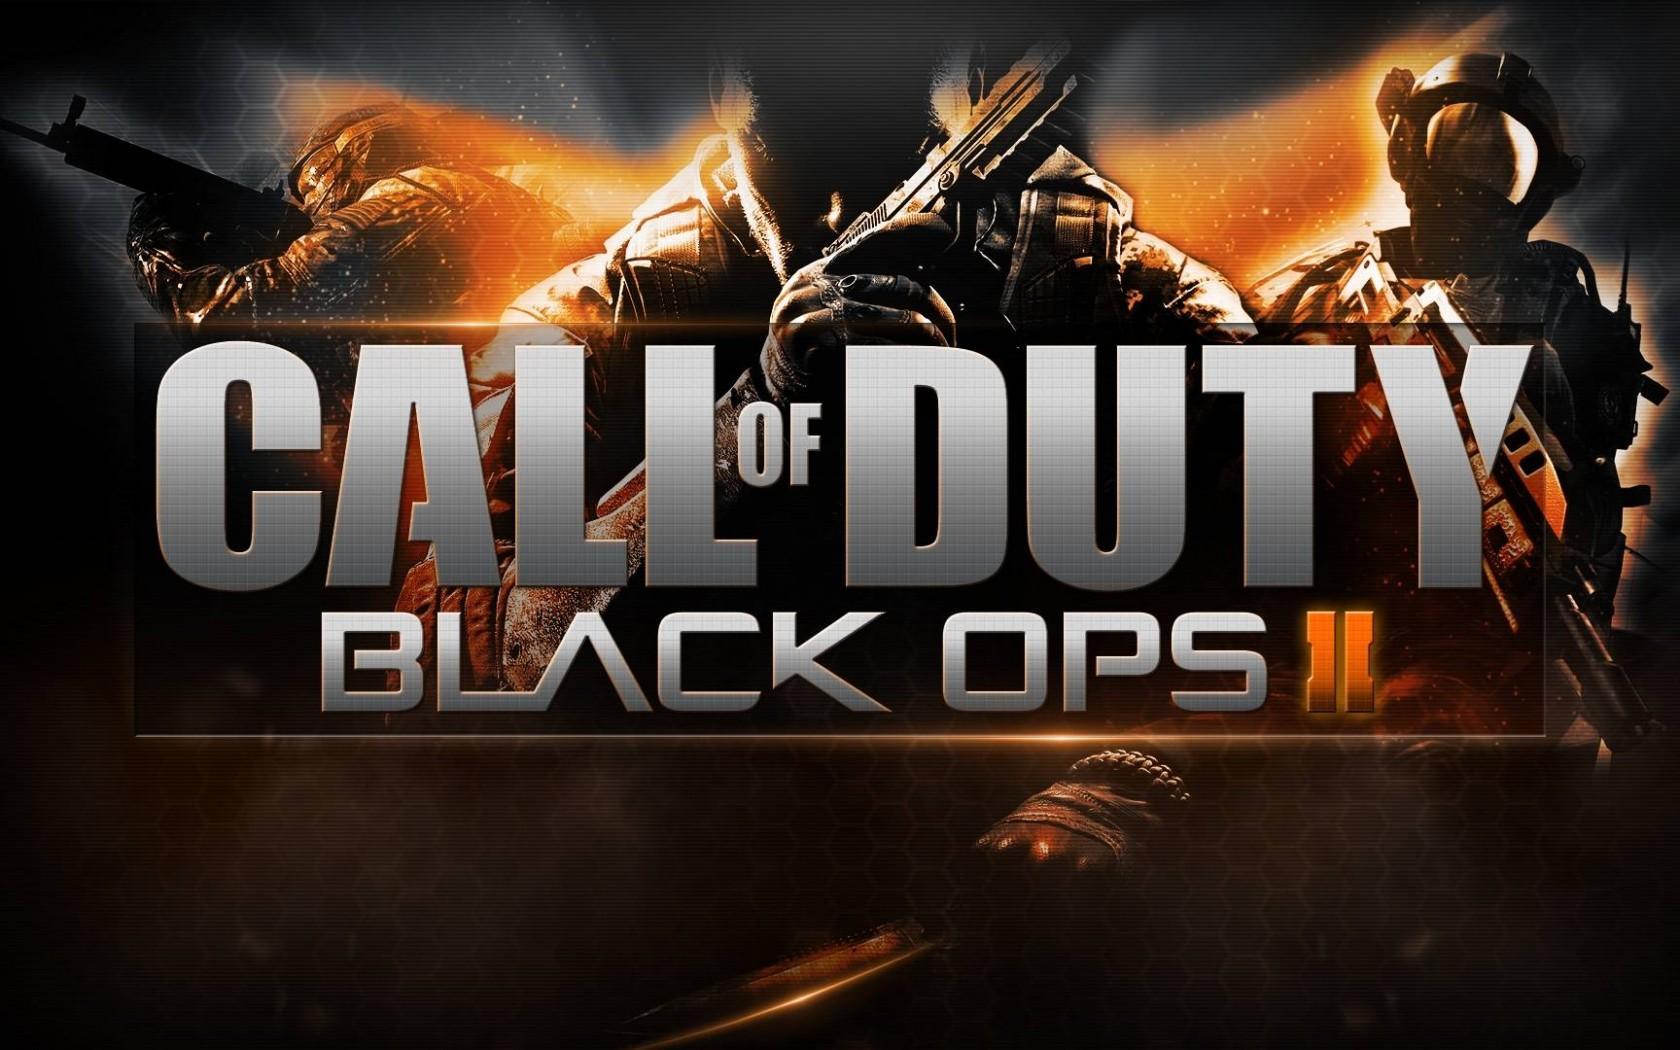 black ops 2 logo wallpapercall of duty black ops 2 wallpaper iphone 1680x1050